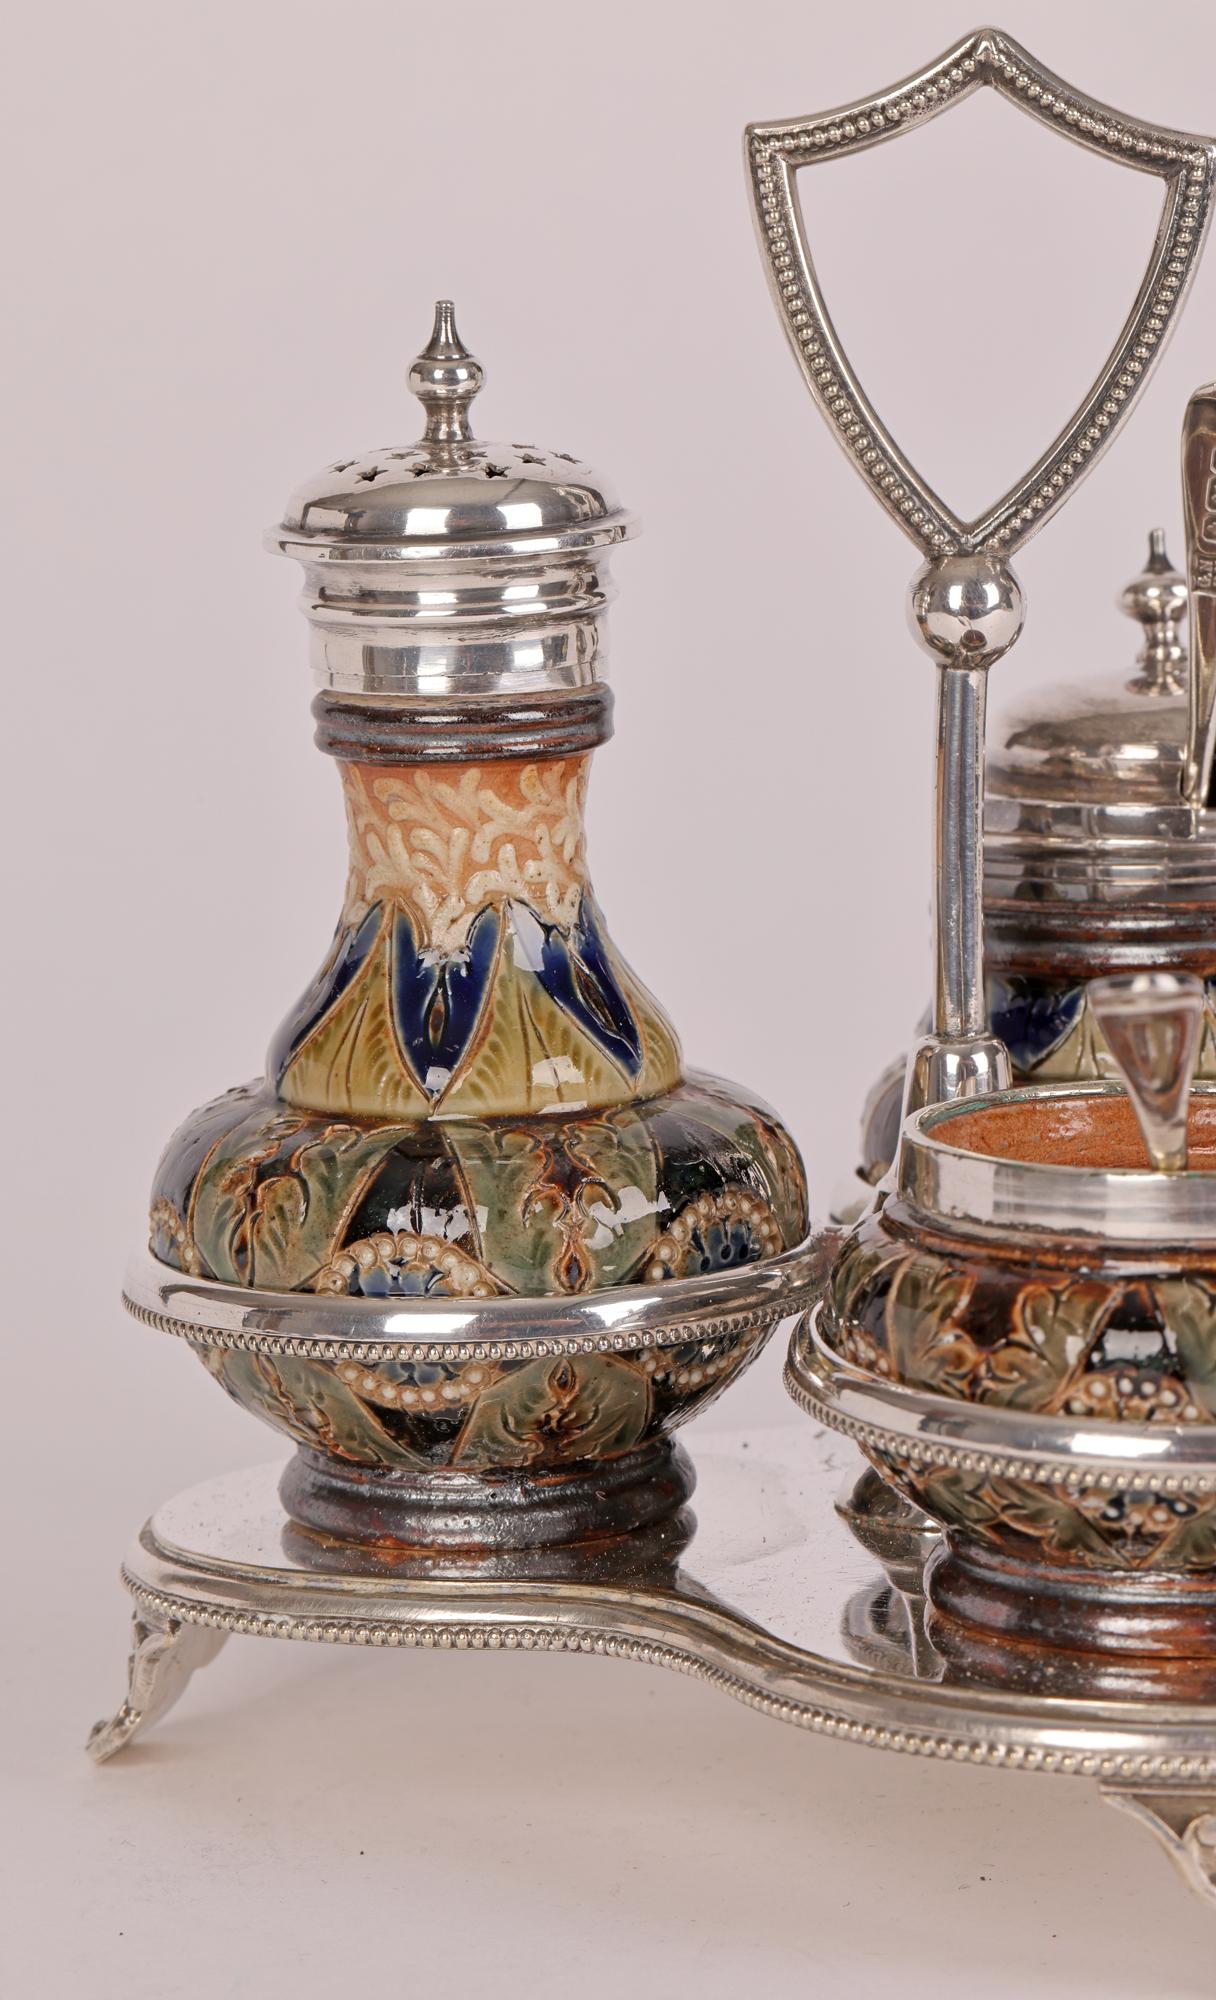 A very fine and rare Doulton Lambeth silver-plate mounted three piece stoneware cruet set contained in a decorative silver plated stand with spoons and dating from 1881. The cruet set comprises of an open salt with salt spoon, a pepper pot and a